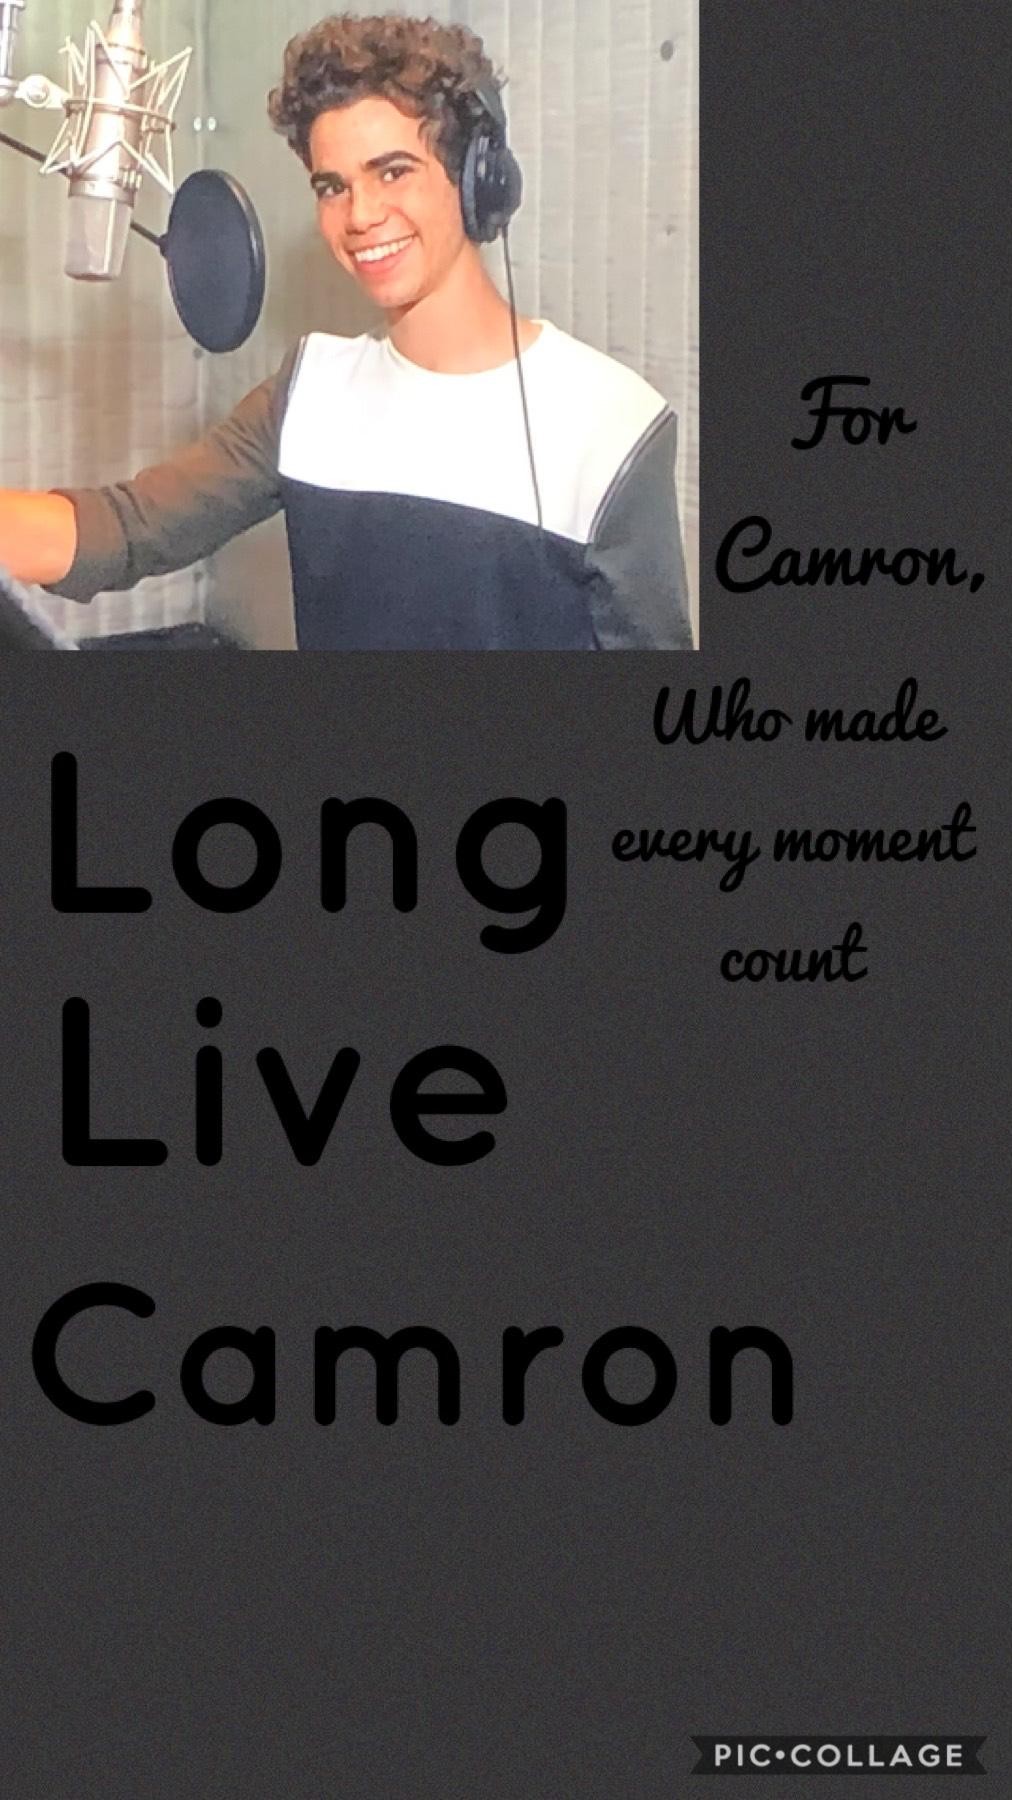 CAMRON WILL BE MISSED